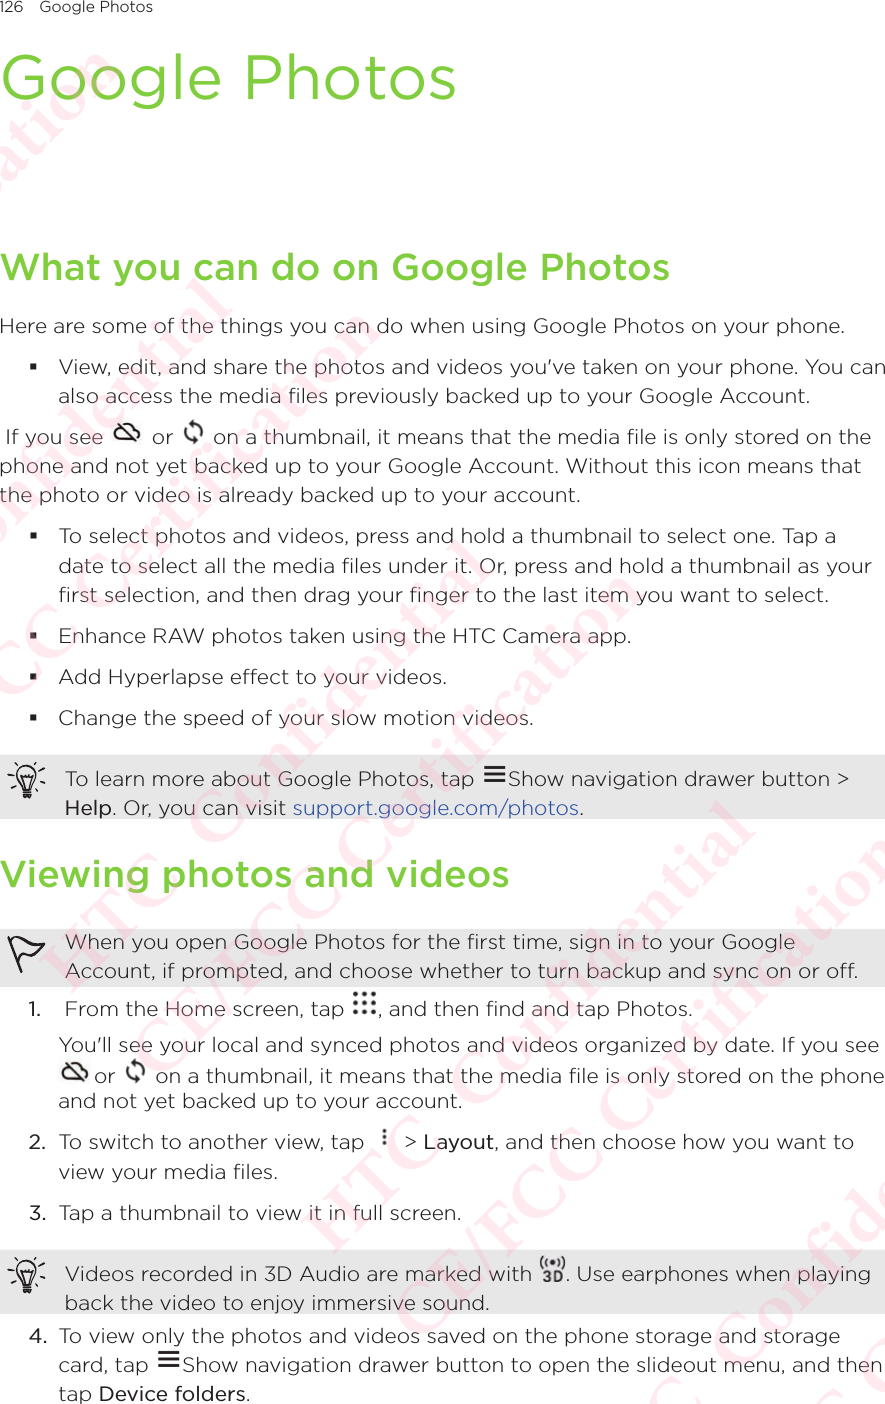 126 Google PhotosGoogle PhotosWhat you can do on Google PhotosHere are some of the things you can do when using Google Photos on your phone. View, edit, and share the photos and videos you&apos;ve taken on your phone. You can also access the media files previously backed up to your Google Account. If you see   or   on a thumbnail, it means that the media file is only stored on the phone and not yet backed up to your Google Account. Without this icon means that the photo or video is already backed up to your account. To select photos and videos, press and hold a thumbnail to select one. Tap a date to select all the media files under it. Or, press and hold a thumbnail as your first selection, and then drag your finger to the last item you want to select. Enhance RAW photos taken using the HTC Camera app. Add Hyperlapse effect to your videos. Change the speed of your slow motion videos.To learn more about Google Photos, tap  Show navigation drawer button &gt; Help. Or, you can visit support.google.com/photos.Viewing photos and videosWhen you open Google Photos for the first time, sign in to your Google Account, if prompted, and choose whether to turn backup and sync on or off.1.   From the Home screen, tap  , and then find and tap Photos. You&apos;ll see your local and synced photos and videos organized by date. If you see or   on a thumbnail, it means that the media file is only stored on the phone and not yet backed up to your account.2.  To switch to another view, tap   &gt; Layout, and then choose how you want to view your media files.3.  Tap a thumbnail to view it in full screen.Videos recorded in 3D Audio are marked with  . Use earphones when playing back the video to enjoy immersive sound.4.  To view only the photos and videos saved on the phone storage and storage card, tap To view only the photos and videos saved on the phone storage and storage Show navigation drawer button to open the slideout menu, and then tap Device folders.HTC  Confidential CE/FCC Certification  HTC  Confidential CE/FCC Certification  HTC  Confidential CE/FCC Certification  HTC  Confidential CE/FCC Certification  HTC  Confidential CE/FCC Certification 